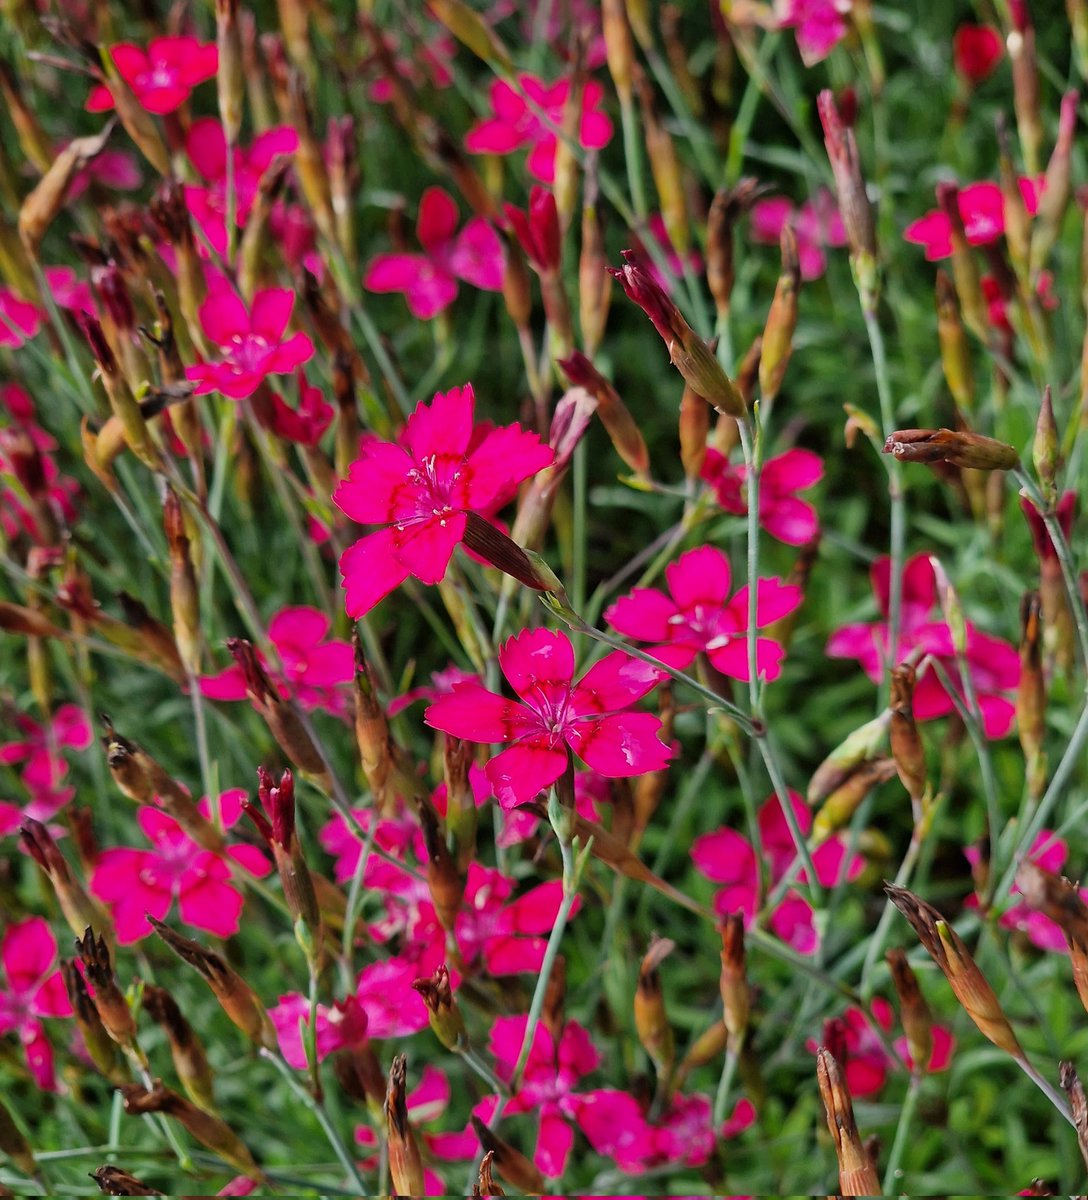 Easy Alpines for the Rock Garden ~ Dianthus deltoides. This is a species that comes from dry meadows and pastures in Europe and Asia. Grow in a sunny spot on well drained soil. Propagation is very easy by seed or division.